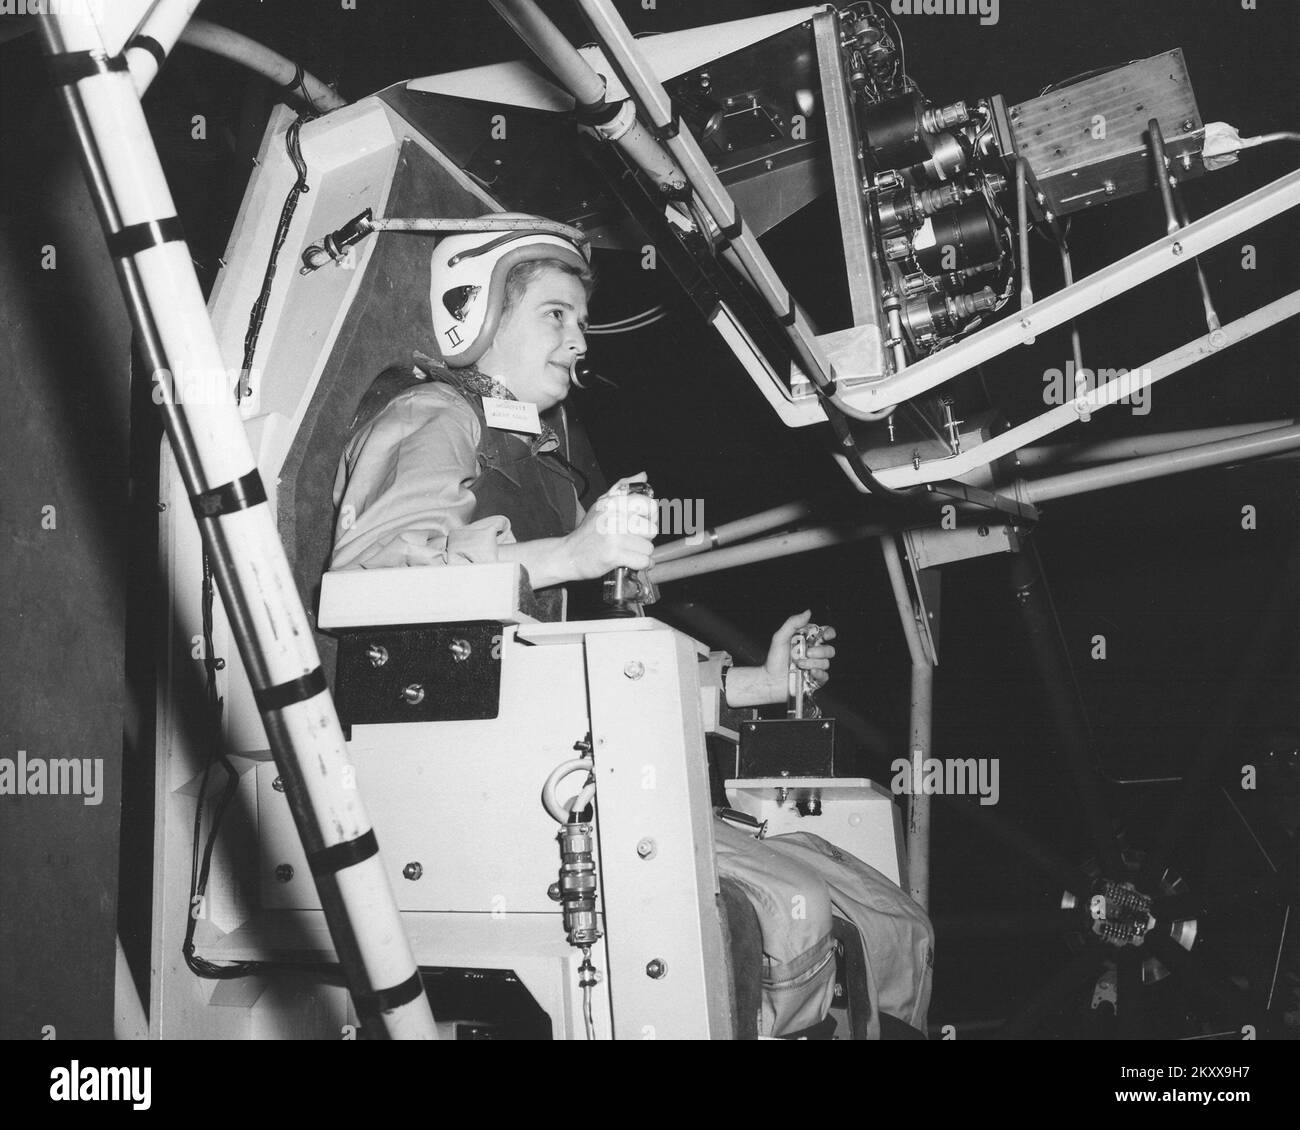 errie Cobb, a well-known woman pilot in the 1950s, flies the Gimbal Rig in the Altitude Wind Tunnel, (AWT) in April 1960 at the Lewis Research Center (now Glenn Research Center). The Gimbal Rig, formally called MASTIF or Multiple Axis Space Test Inertia Facility, was used to train the Mercury 7 astronauts to control the spin of a tumbling spacecraft. As part of a privately funded initiative Jerrie Cobb was the first woman to pass all three phases of the Mercury astronaut screening program. April 6, 1960 Stock Photo